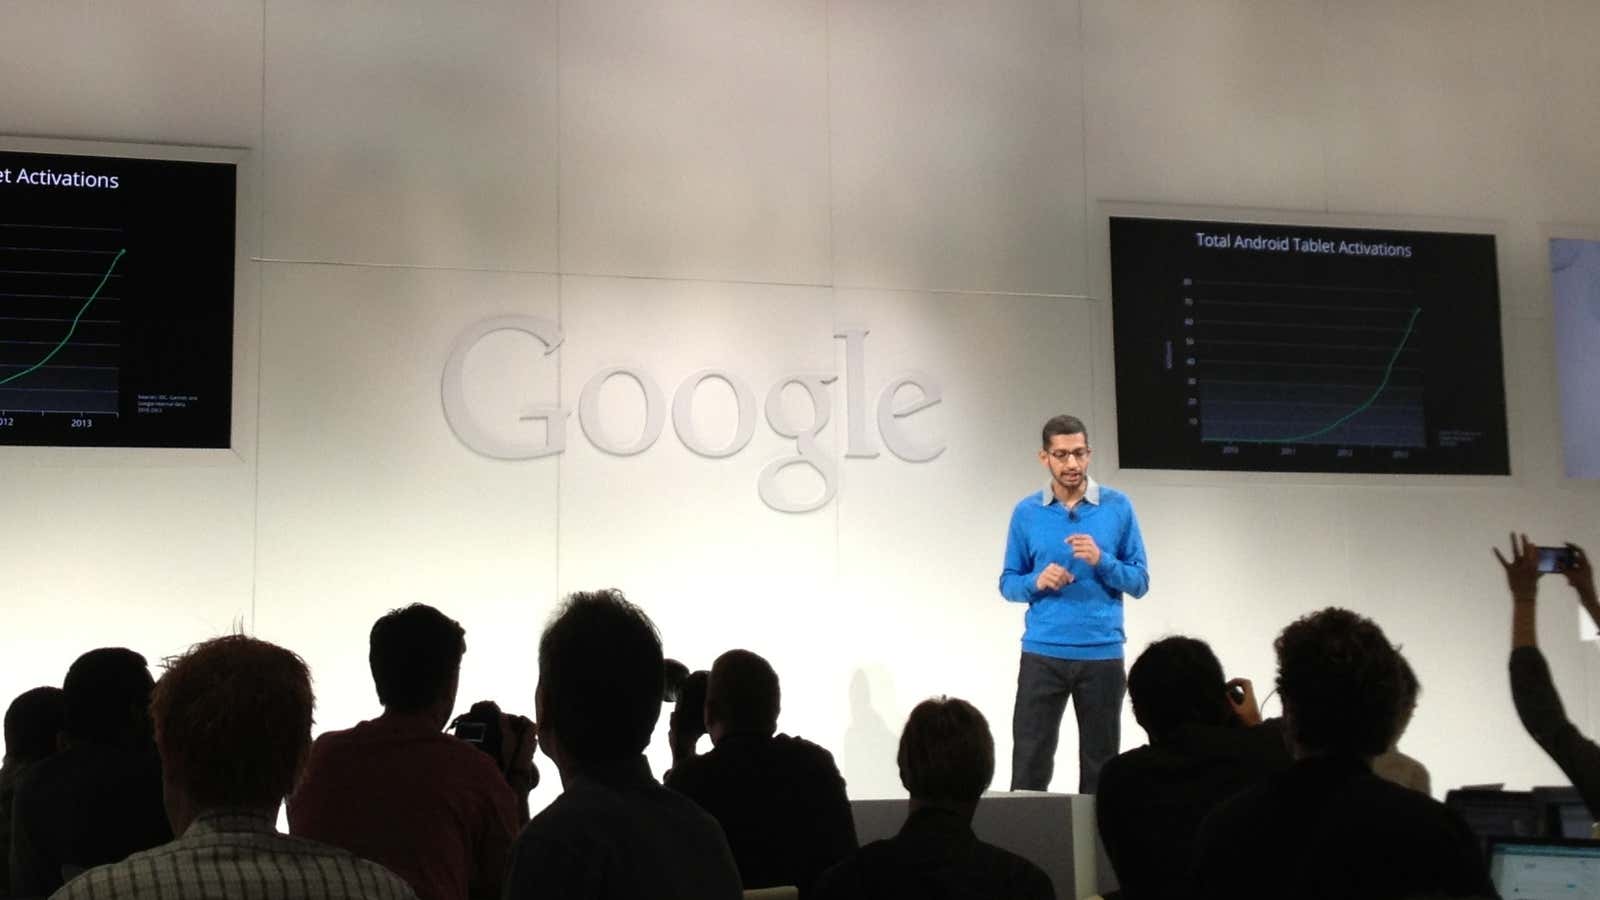 Google’s Sundar Pichai, head of Android and Chrome, says Android tablet activations are approaching some kind of tablet singularity.